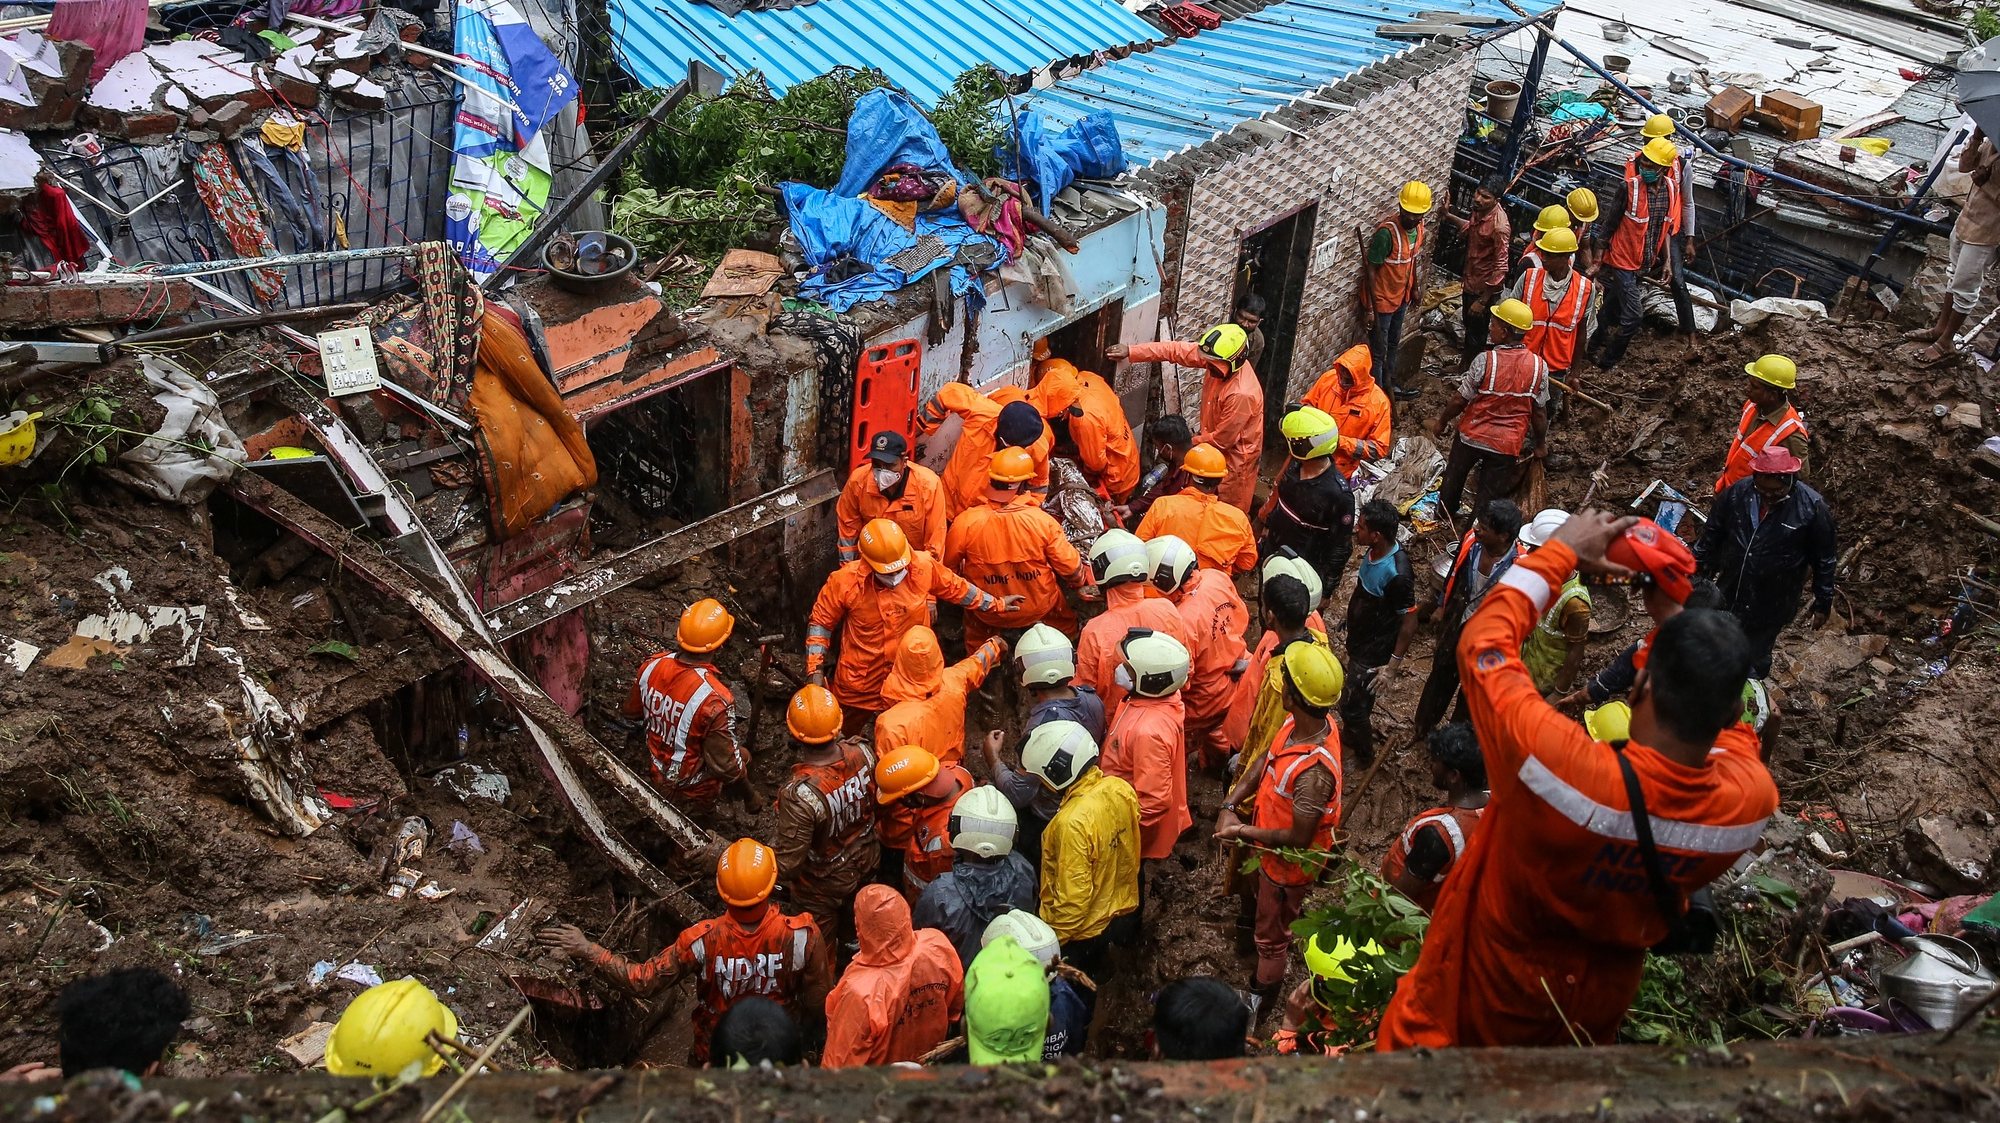 epa09352181 National Disaster Response Force (NDRF) personnel recover dead body from the rubble during a rescue operation in the aftermath of a landslide at a Bharat Nagar slum in Chembur, Mumbai, India, 18 July 2021. According to the police and municipal officials at least 22 people are dead and several others injured after a wall collapsed on some shanties in Chembur&#039;s Bharat Nagar area due to a landslide after heavy rainfall in the city.  EPA/DIVYAKANT SOLANKI